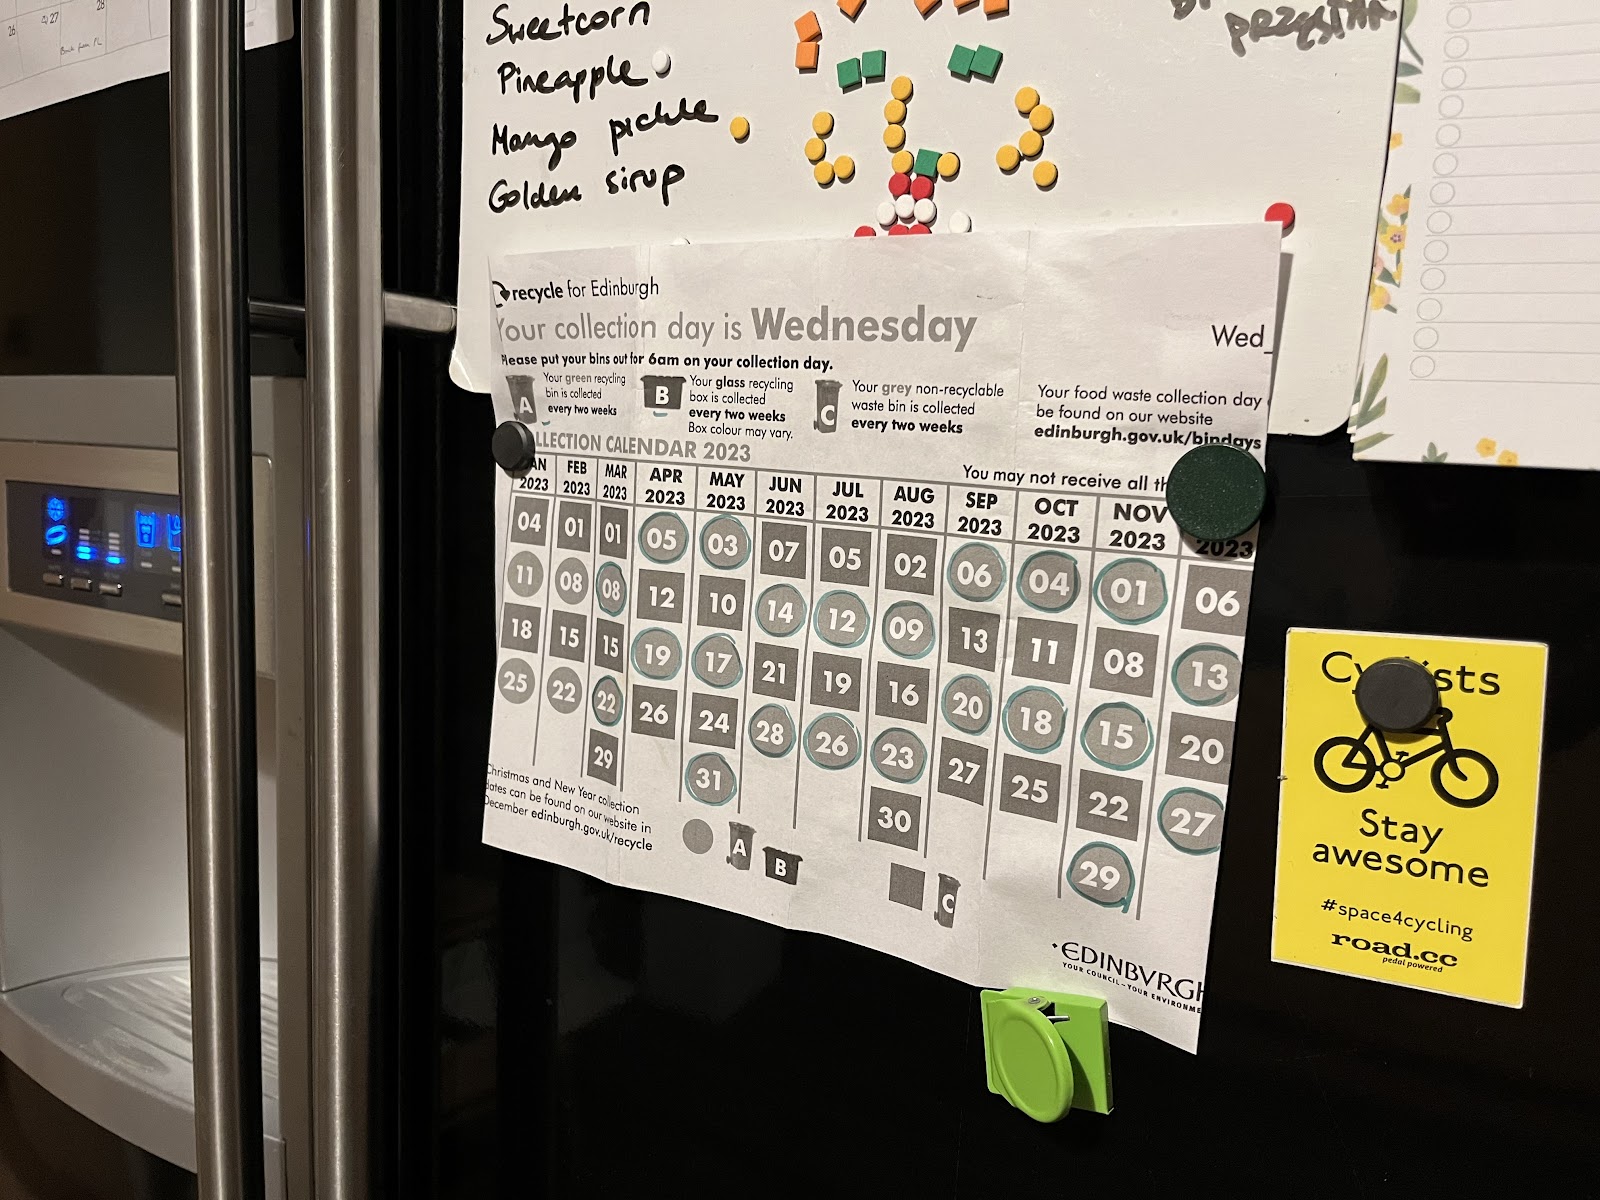 photo of a recycling bin calendar attached to the door of a fridge